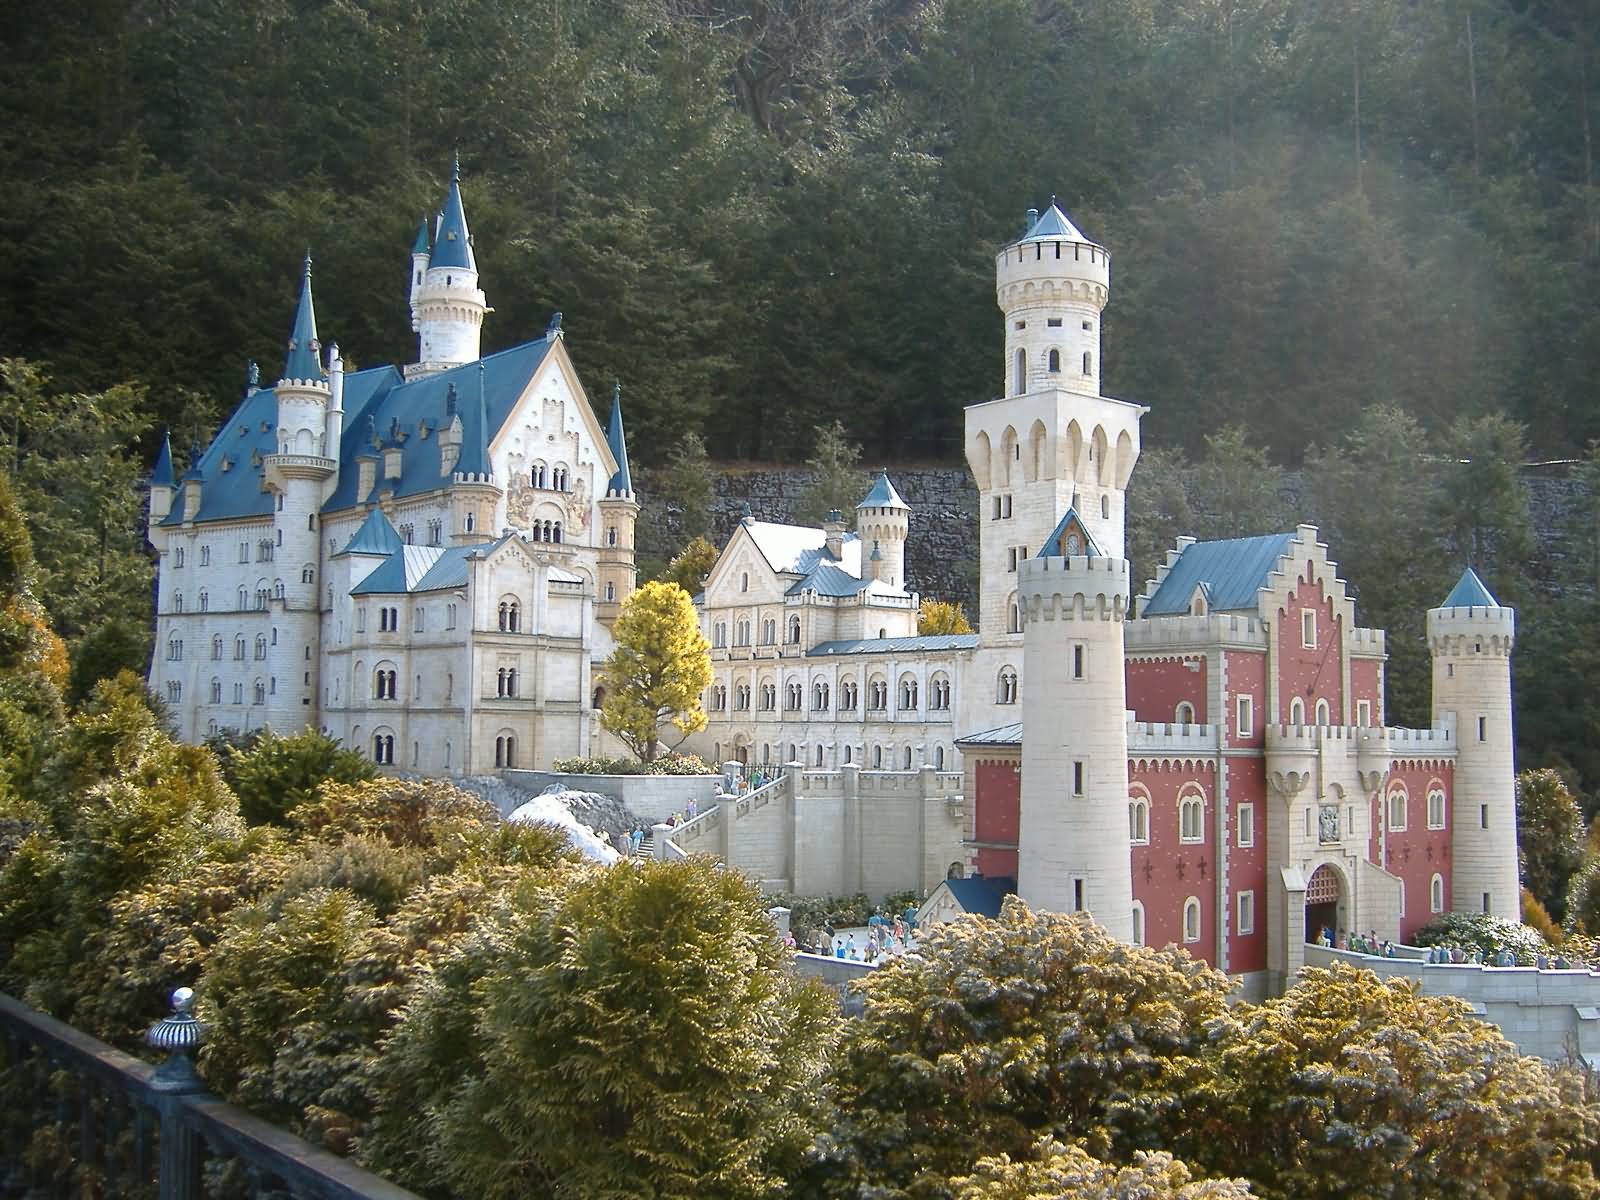 Beautiful Picture Of The Neuschwanstein Castle In Germany